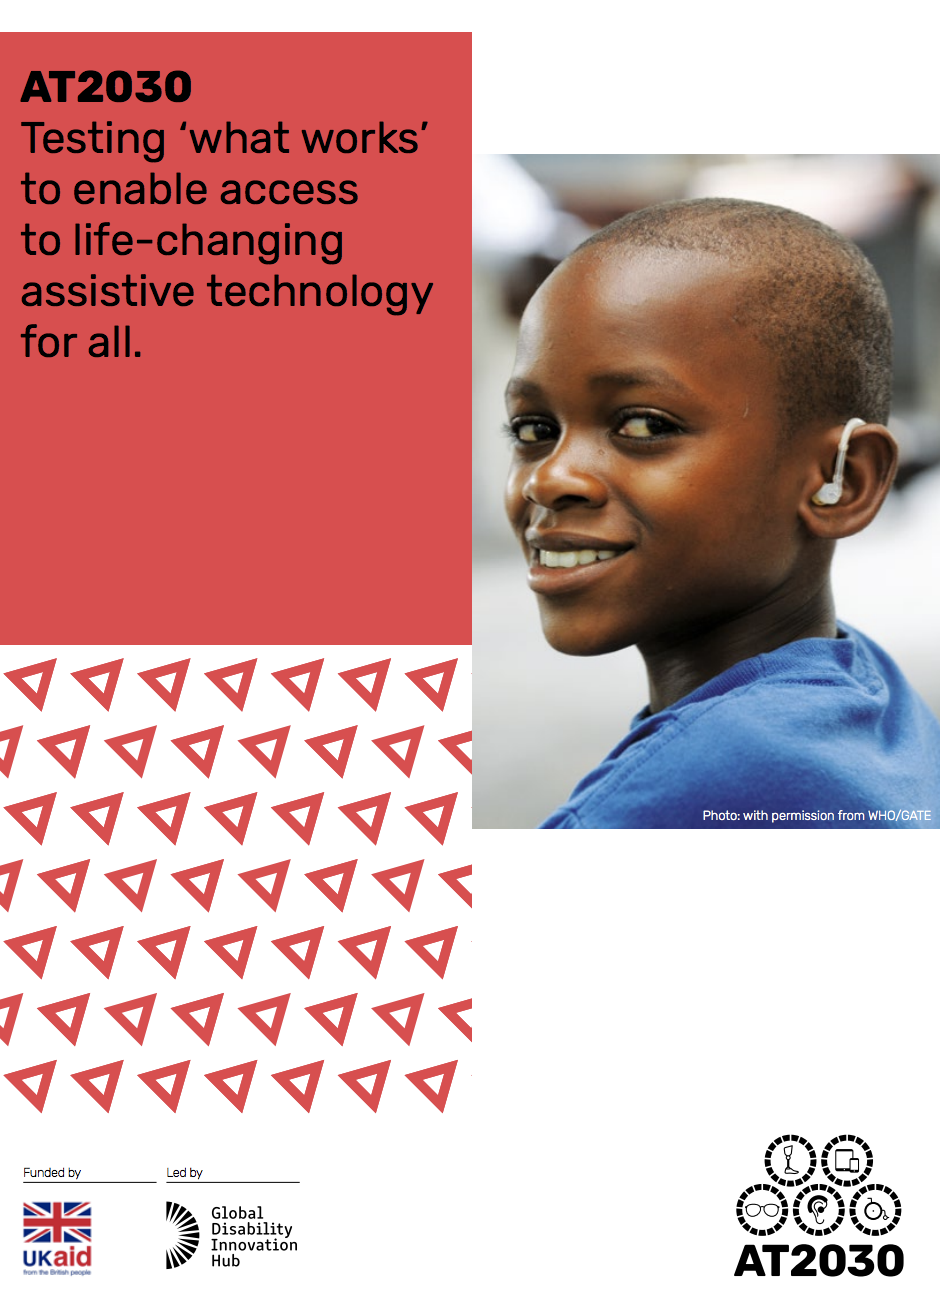 AT2030 Testing 'what works' to enable access to life-changing assistive technology. Cover Image